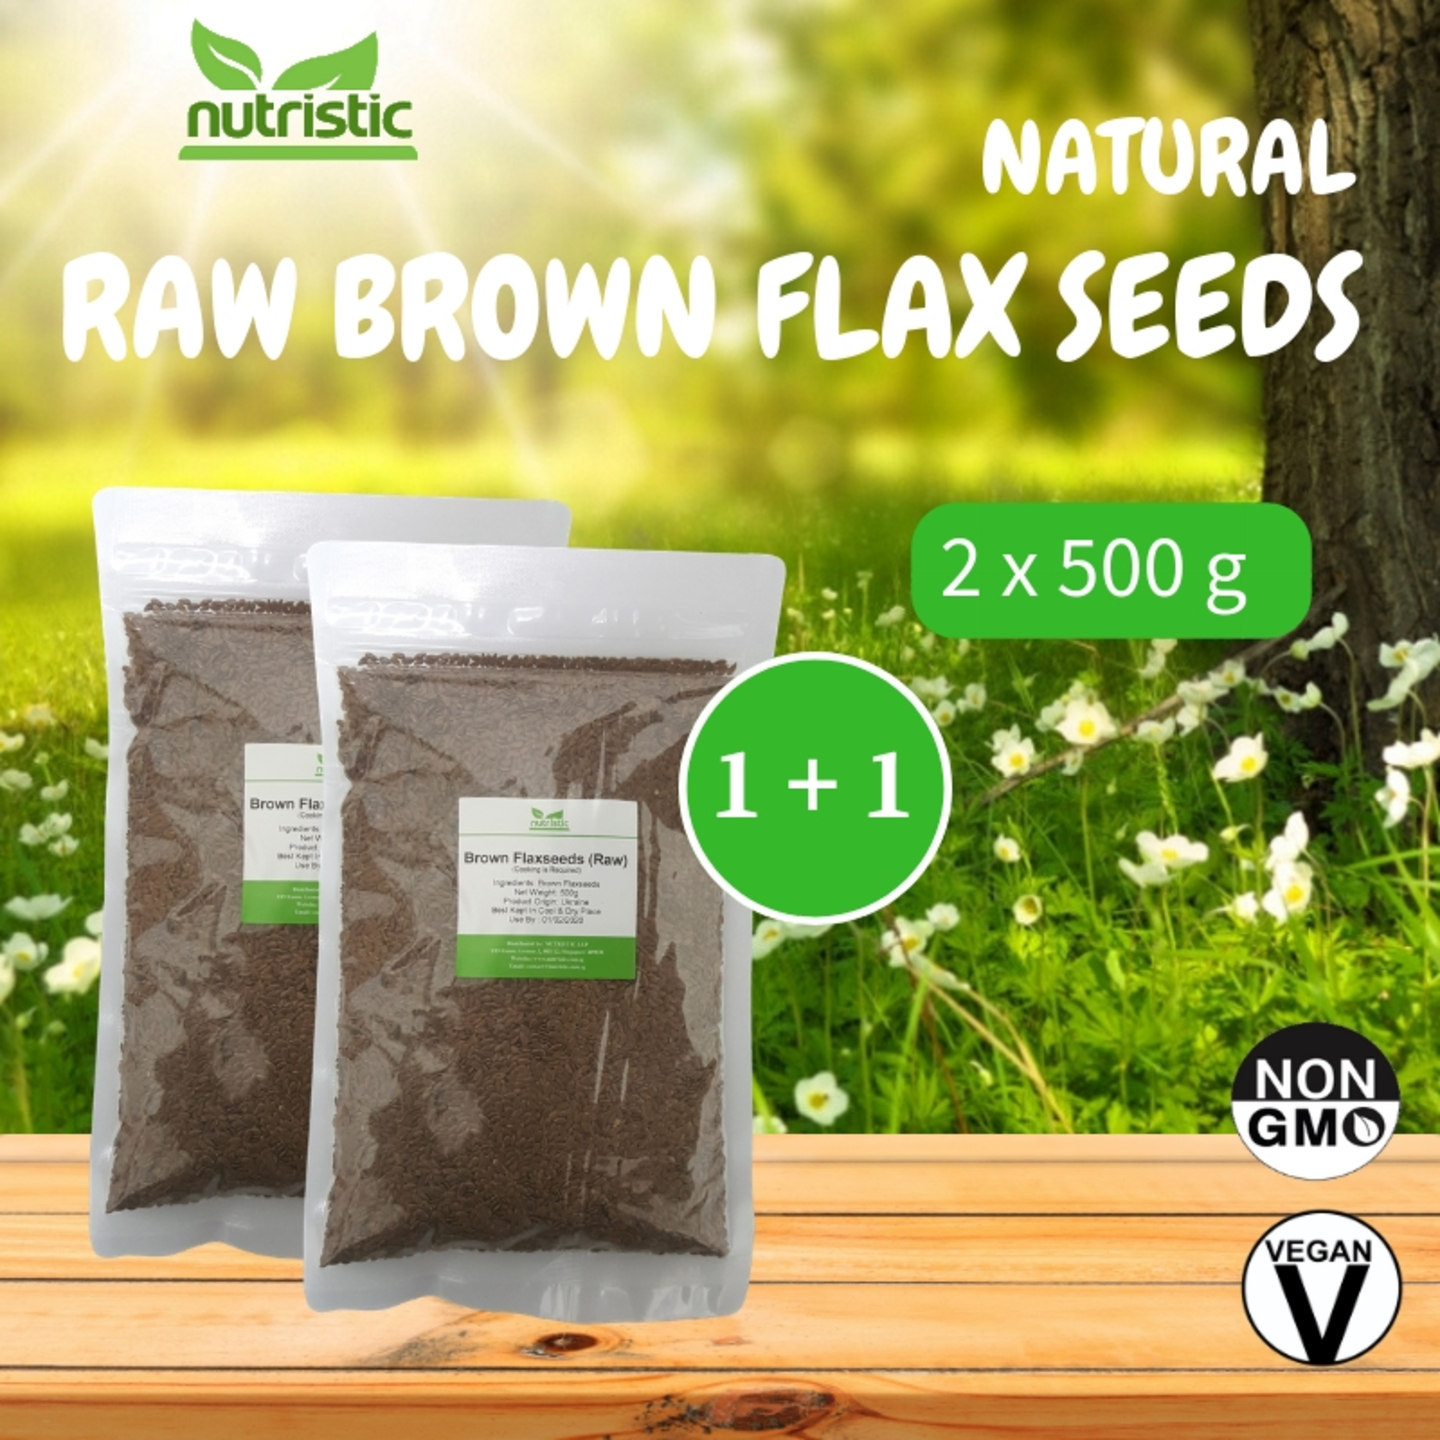 Natural Raw Brown Flax Seeds 500g x2 - Value Bundle 1+1